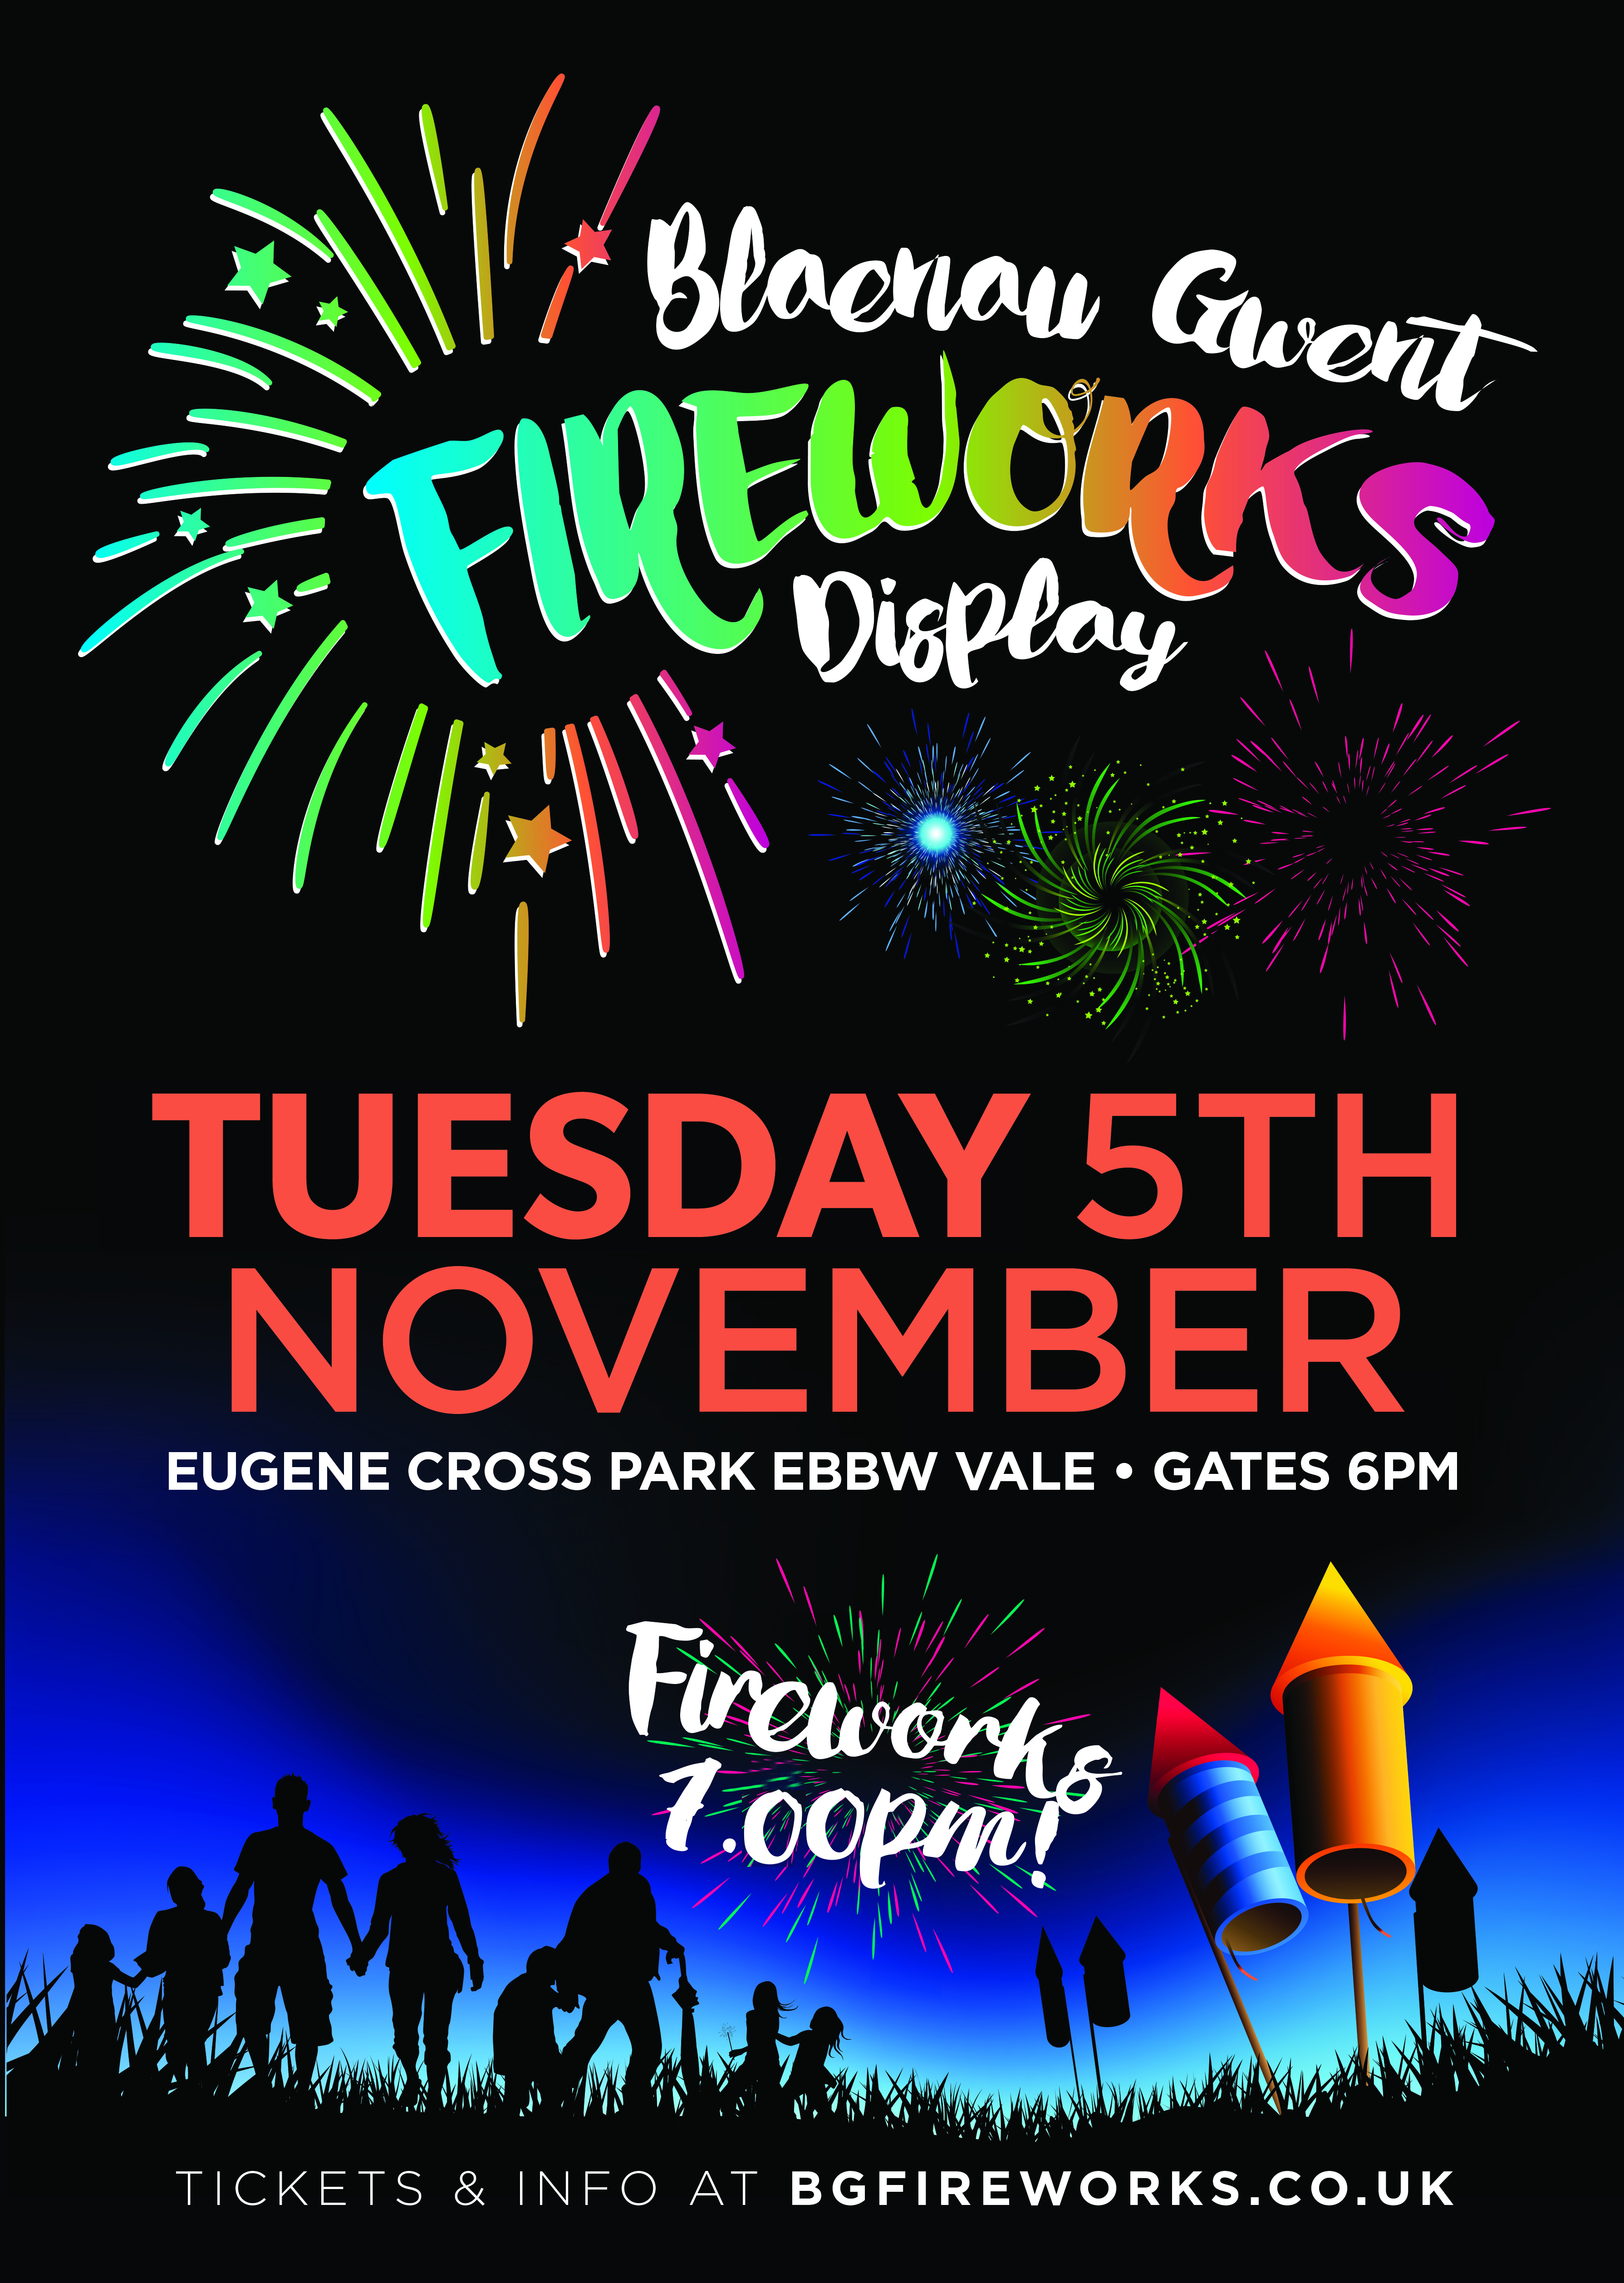 Blaenau Gwent Fireworks 2019 A3 - South Wales Fire and Rescue Service